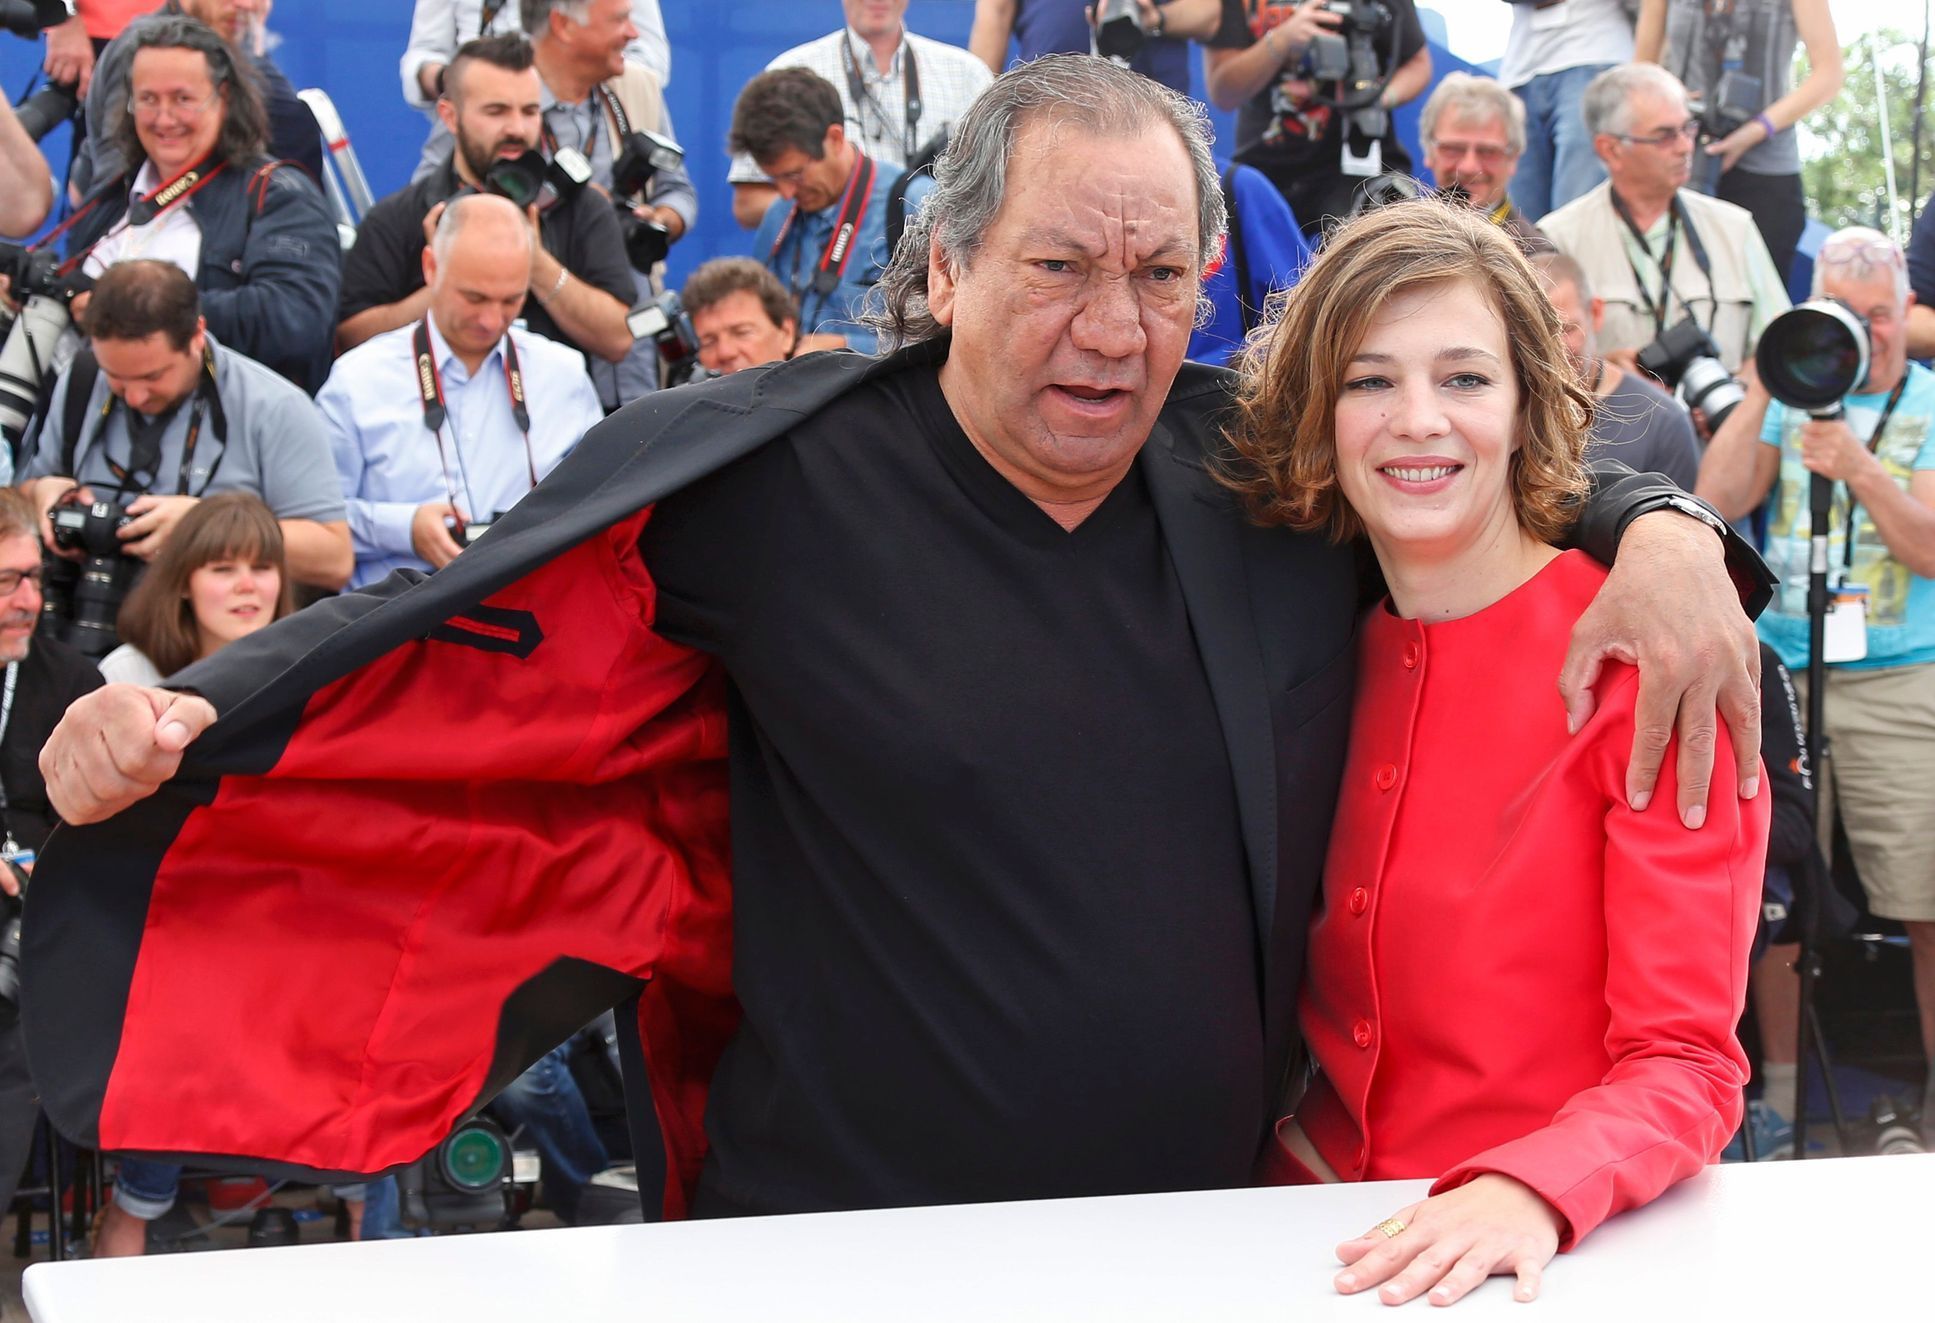 Director Tony Gatlif and cast member Celine Sallette pose during a photocall for the film &quot;Geronimo&quot; presented as part of the specials screenings at the 67th Cannes Film Festival in Cannes